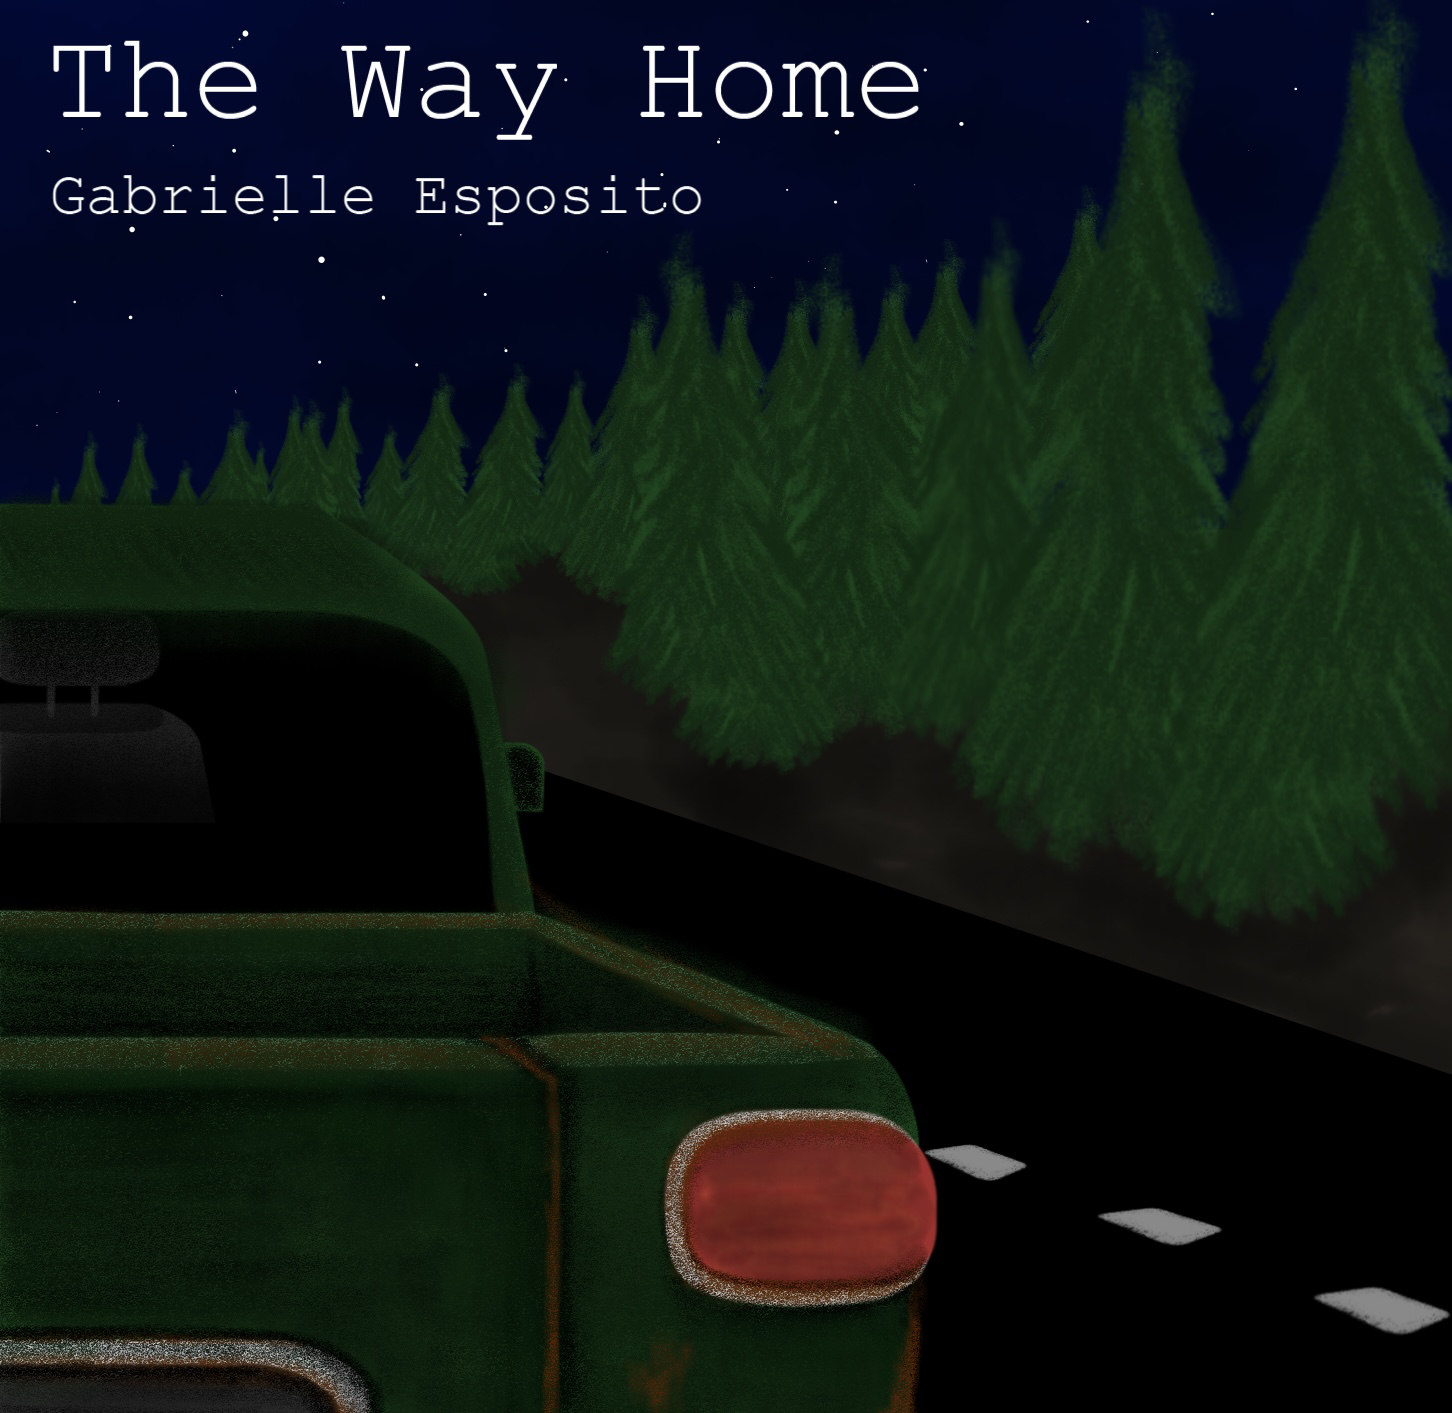 The Way Home by Gabrielle Esposito